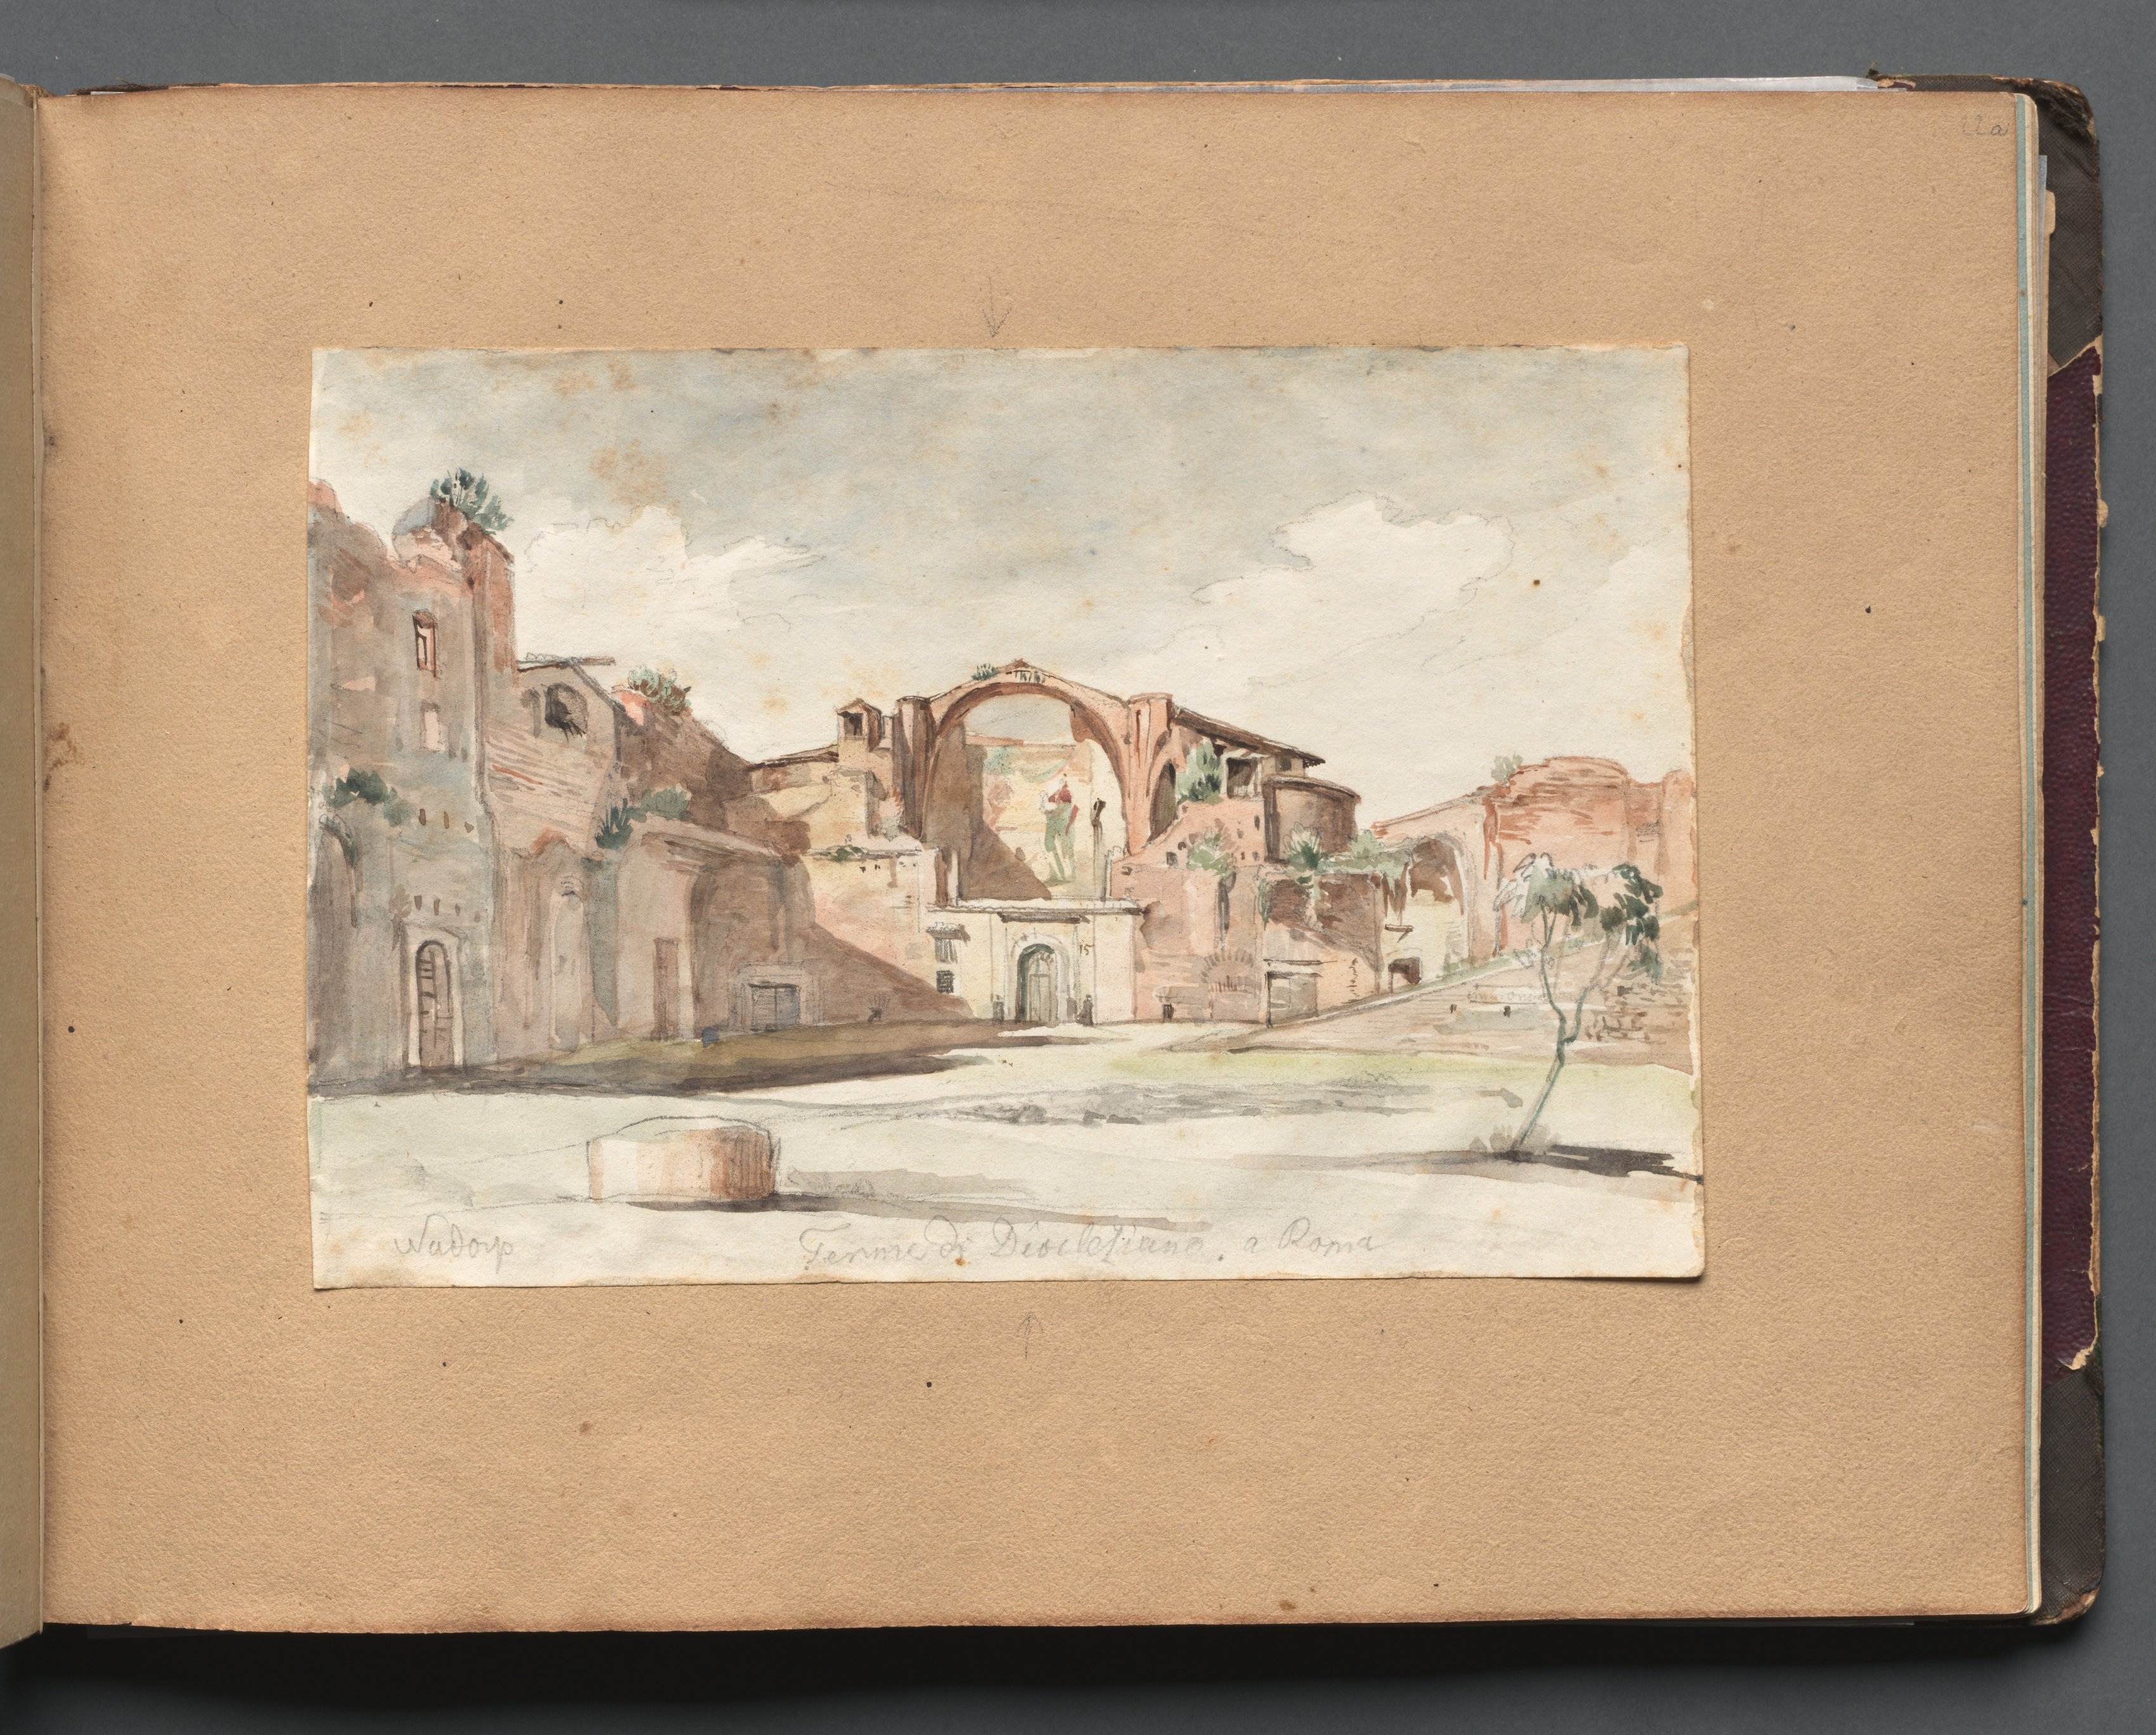 Album with Views of Rome and Surroundings, Landscape Studies, page 22a: "Terme di Diocleziano, Rome"